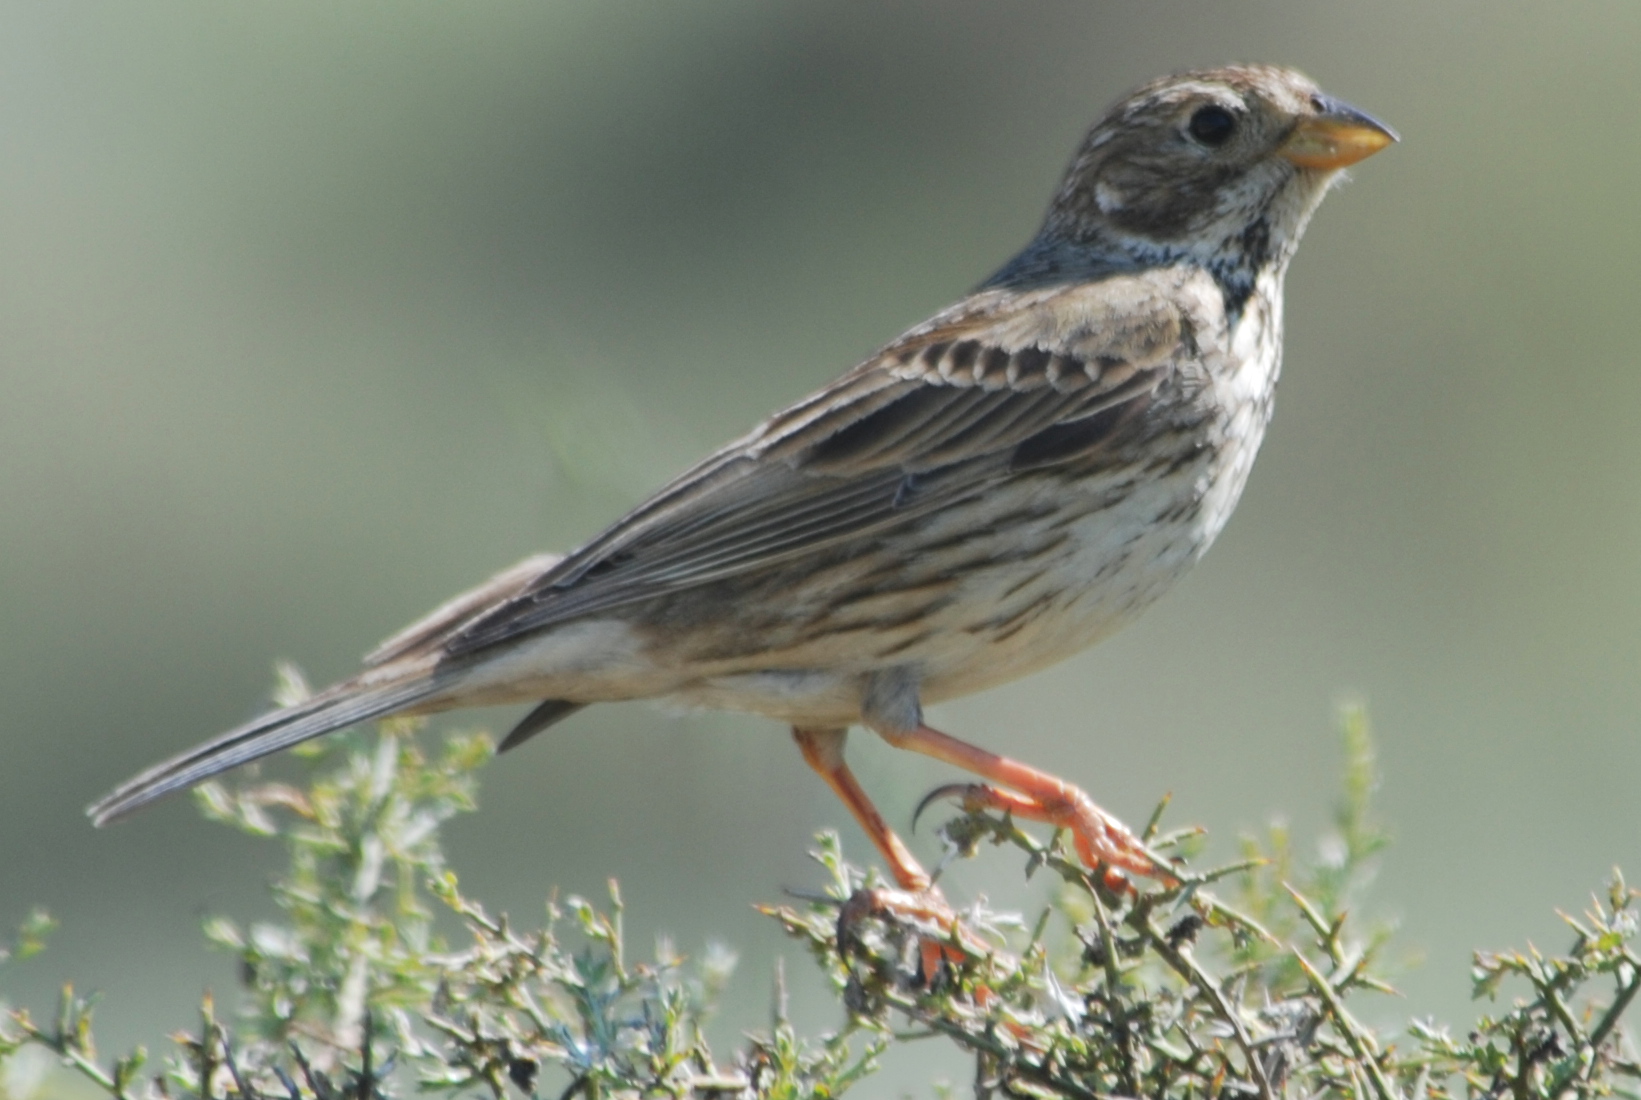 Click picture to see more Corn Buntings.